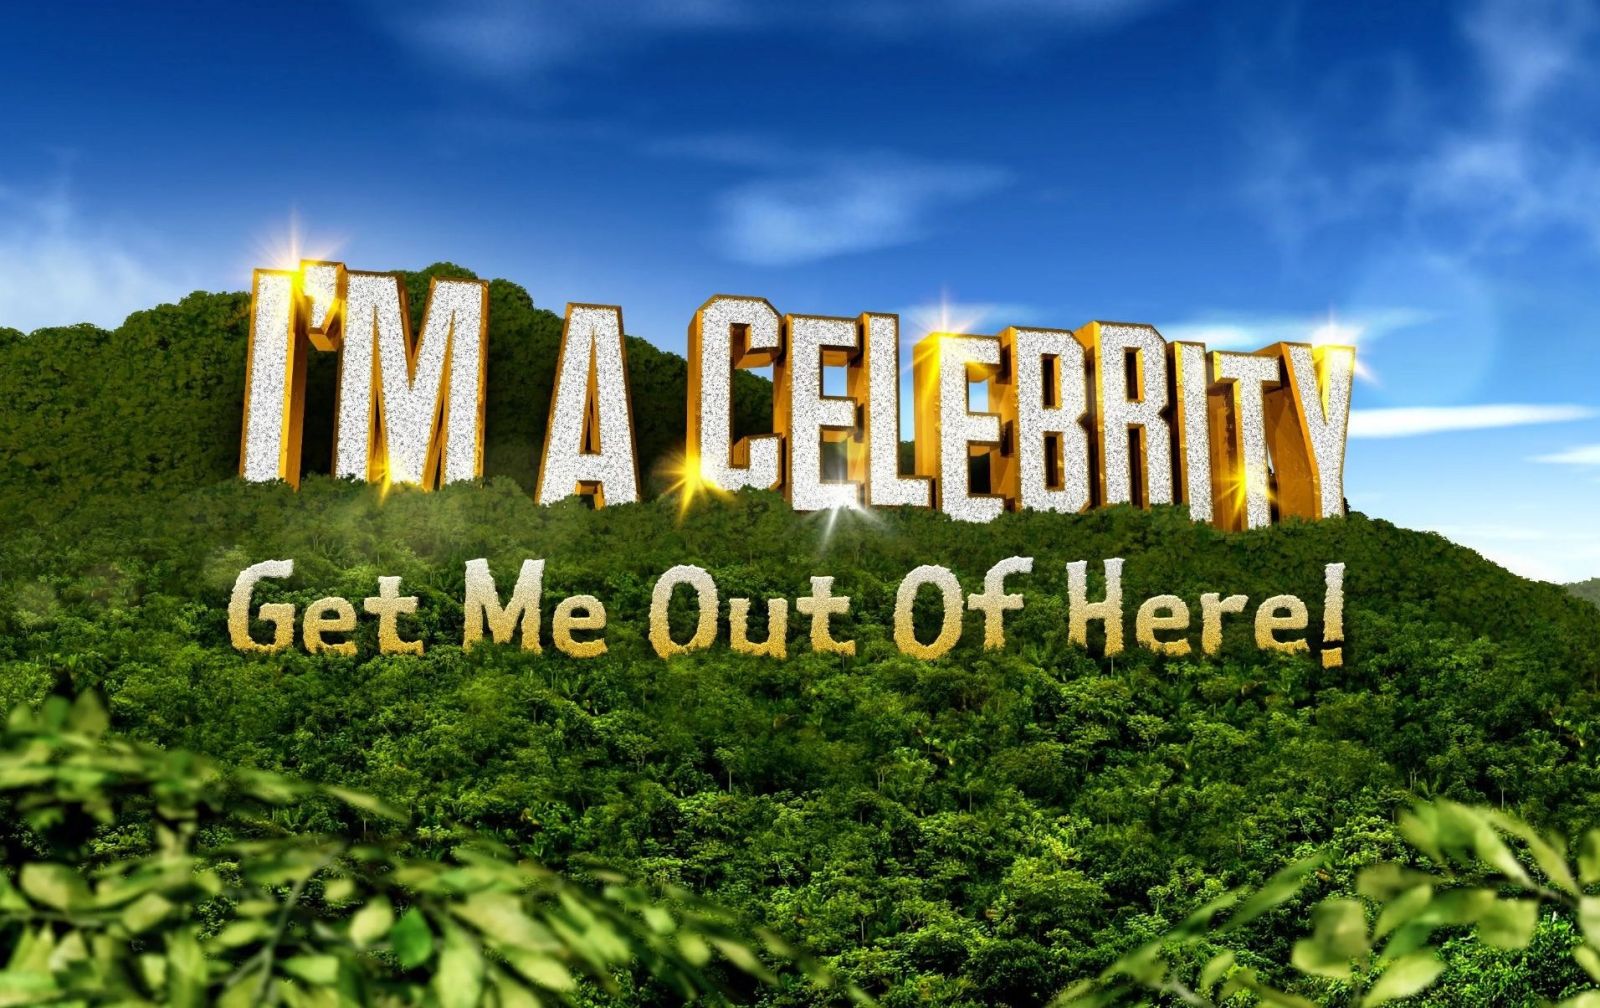 Nick Pickard - I'm A Celebrity Get Me Out Of Here!